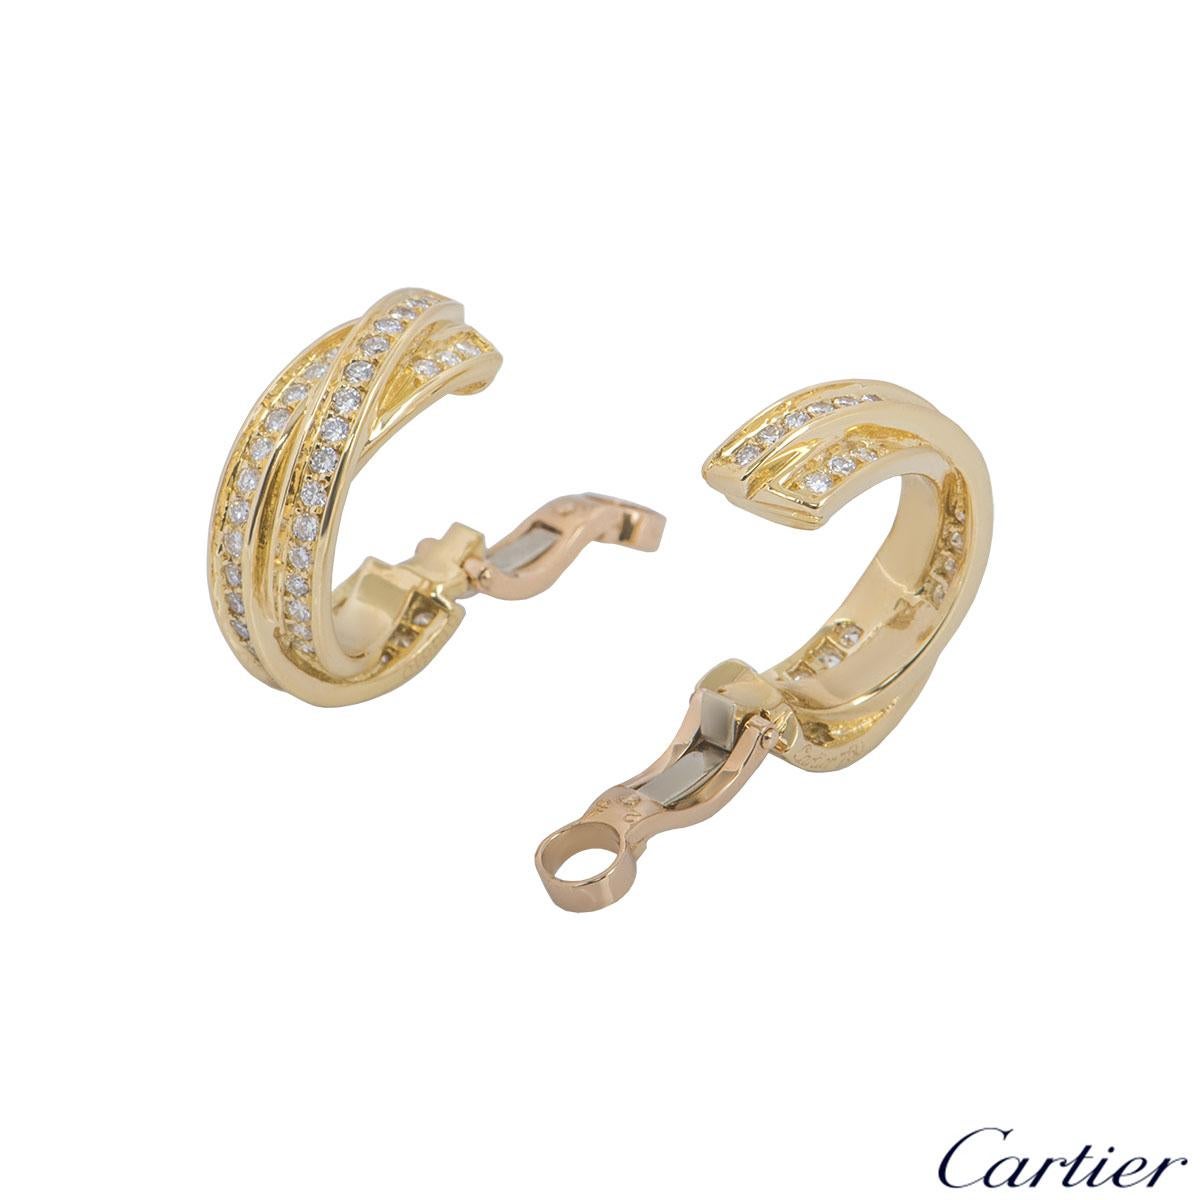 A beautiful pair of 18k yellow gold diamond hoop earrings by Cartier from the Trinity de Cartier collection. The earrings comprise of 3 intertwined yellow gold bands with 90 round brilliant cut diamond set in a pave setting throughout. The earrings